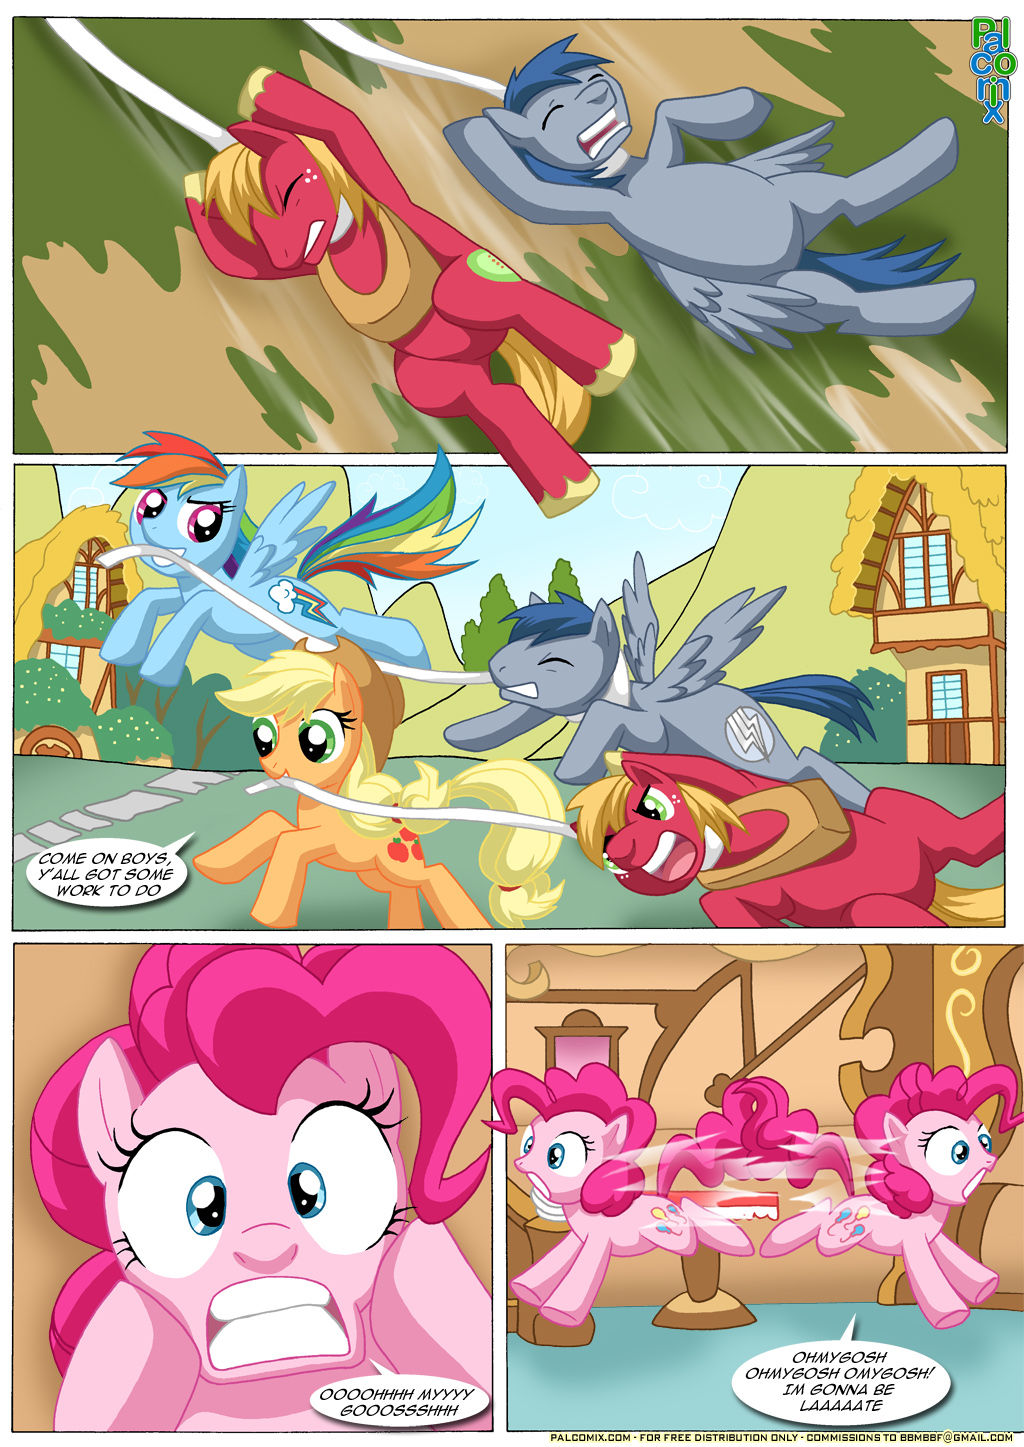 [Palcomix] Pinky's Porntastic Party (My Little Pony: Friendship is Magic) 